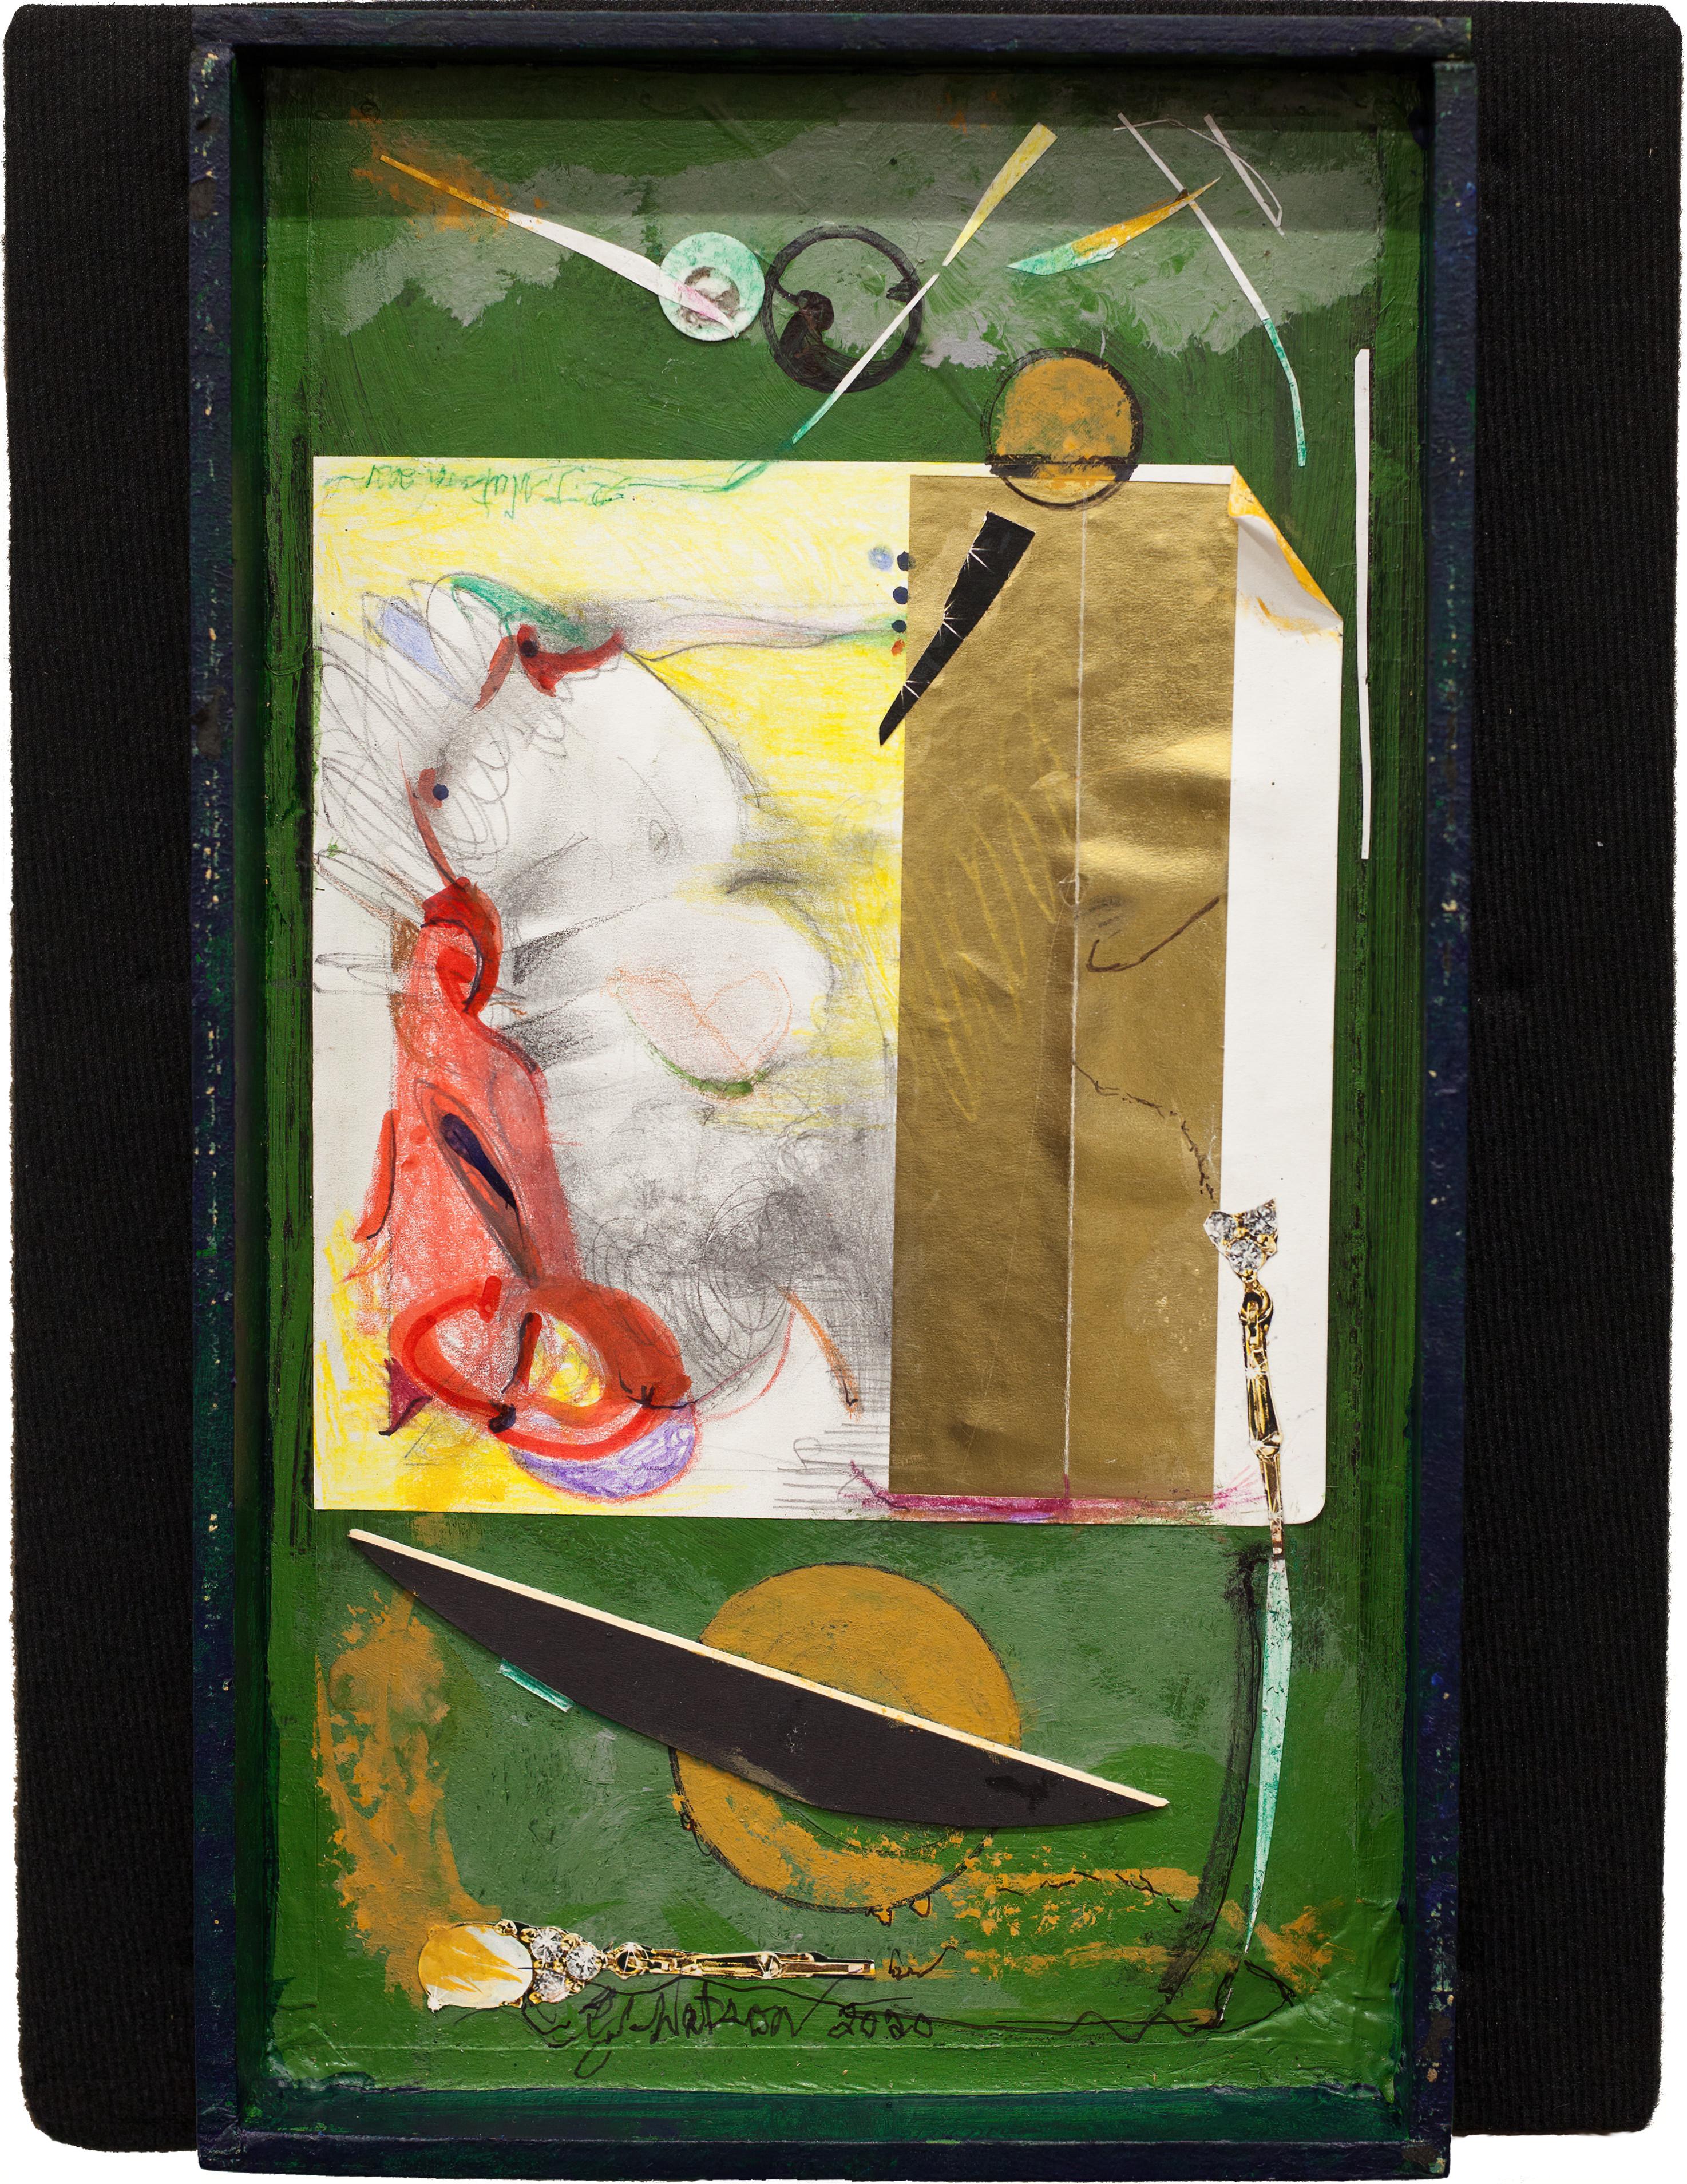 Whistle A Happy Tune: shadow box painting & collage w/ figures & found objects